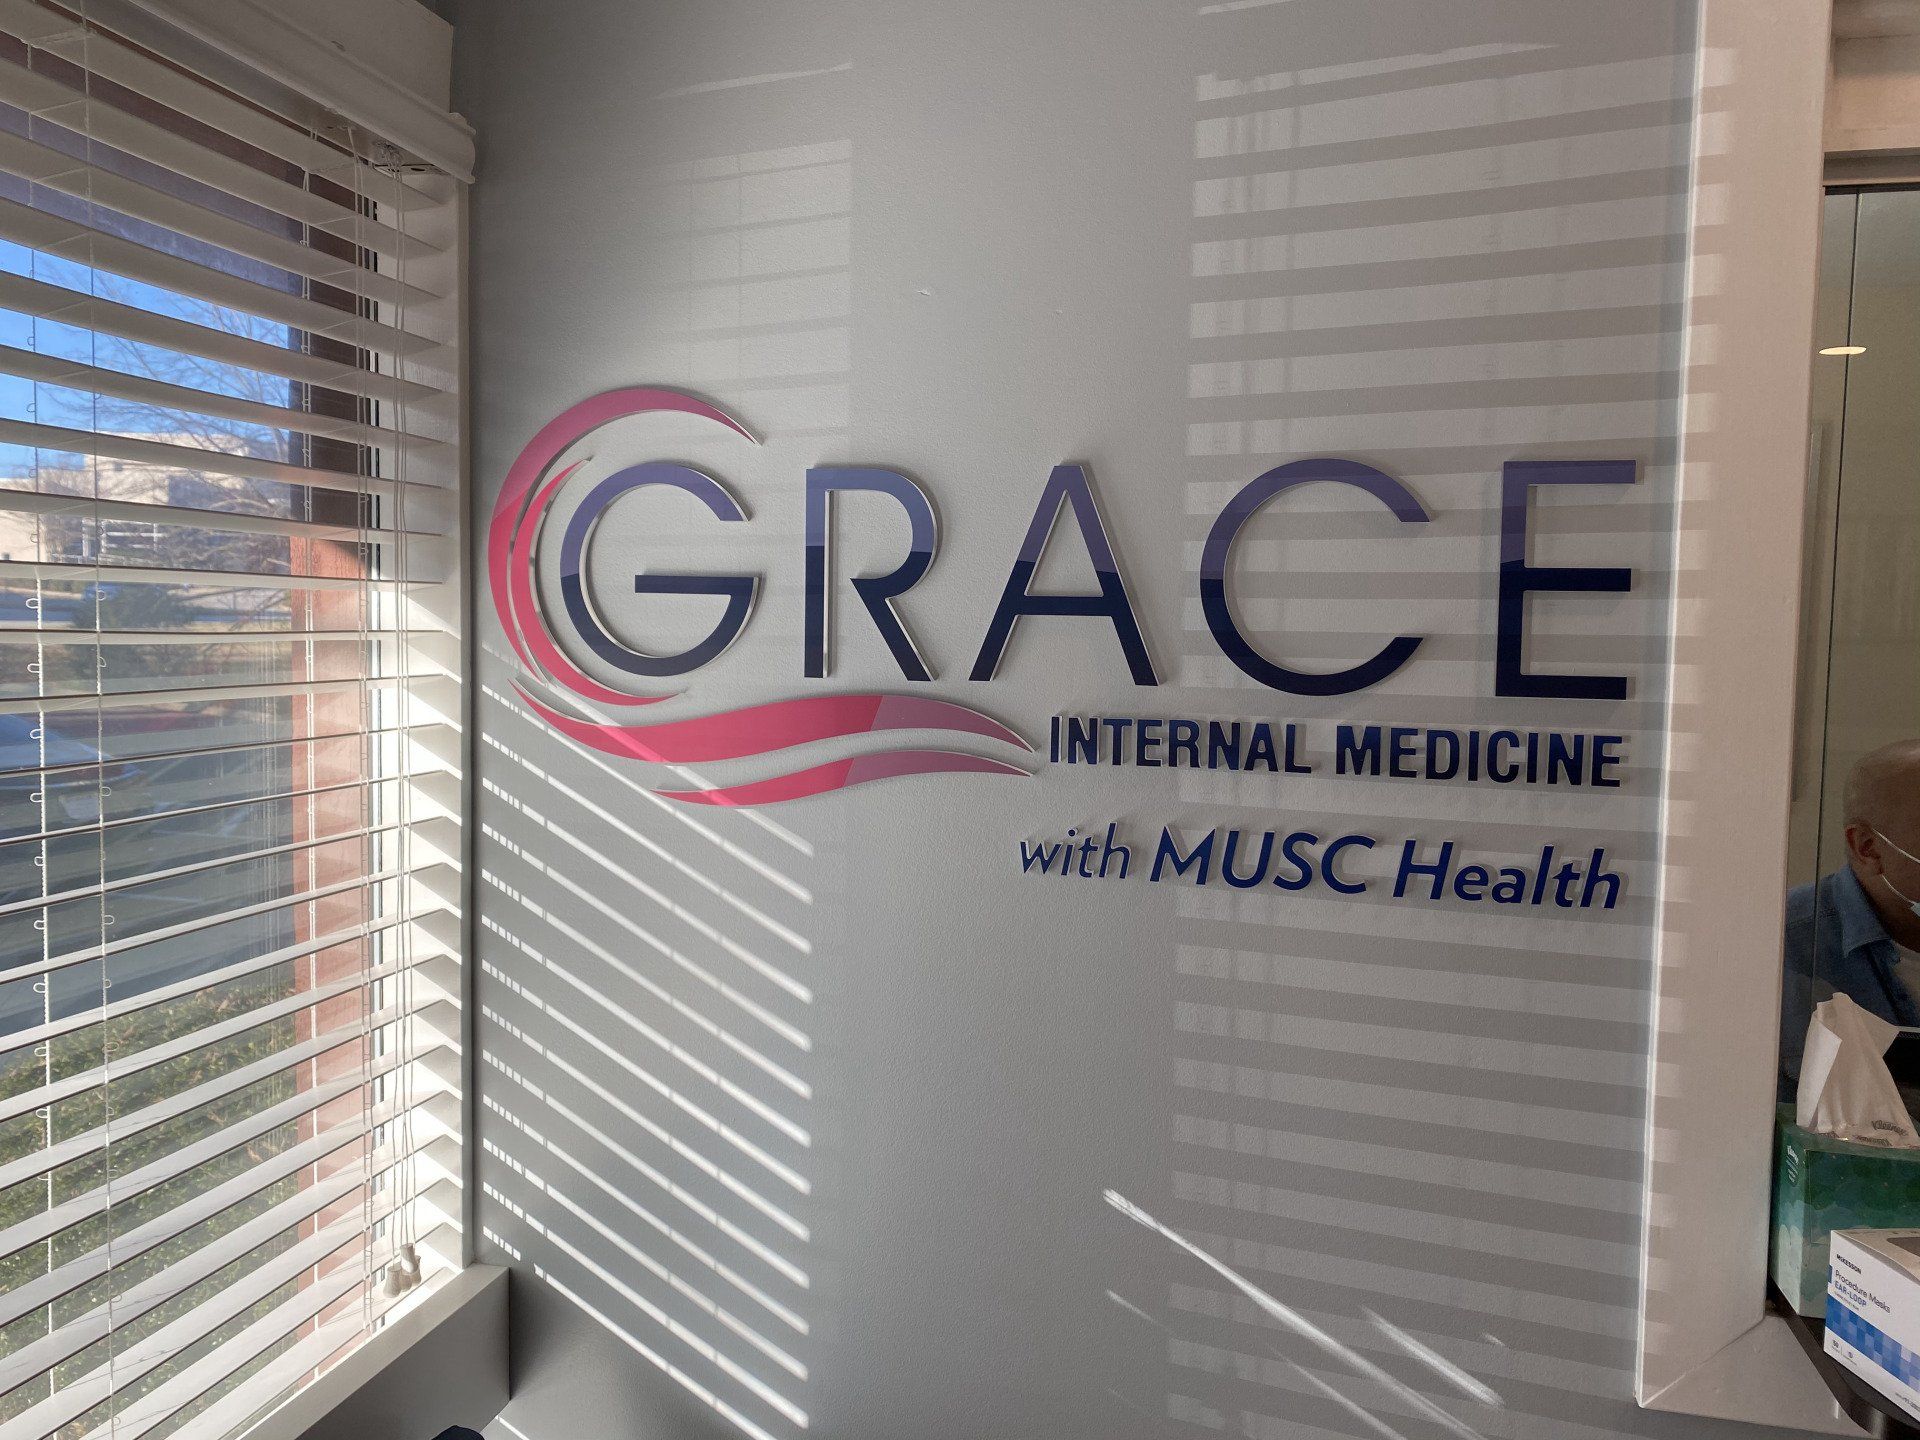 grace internal medicine - vinyl graphic for interiors by upstate signs and graphics